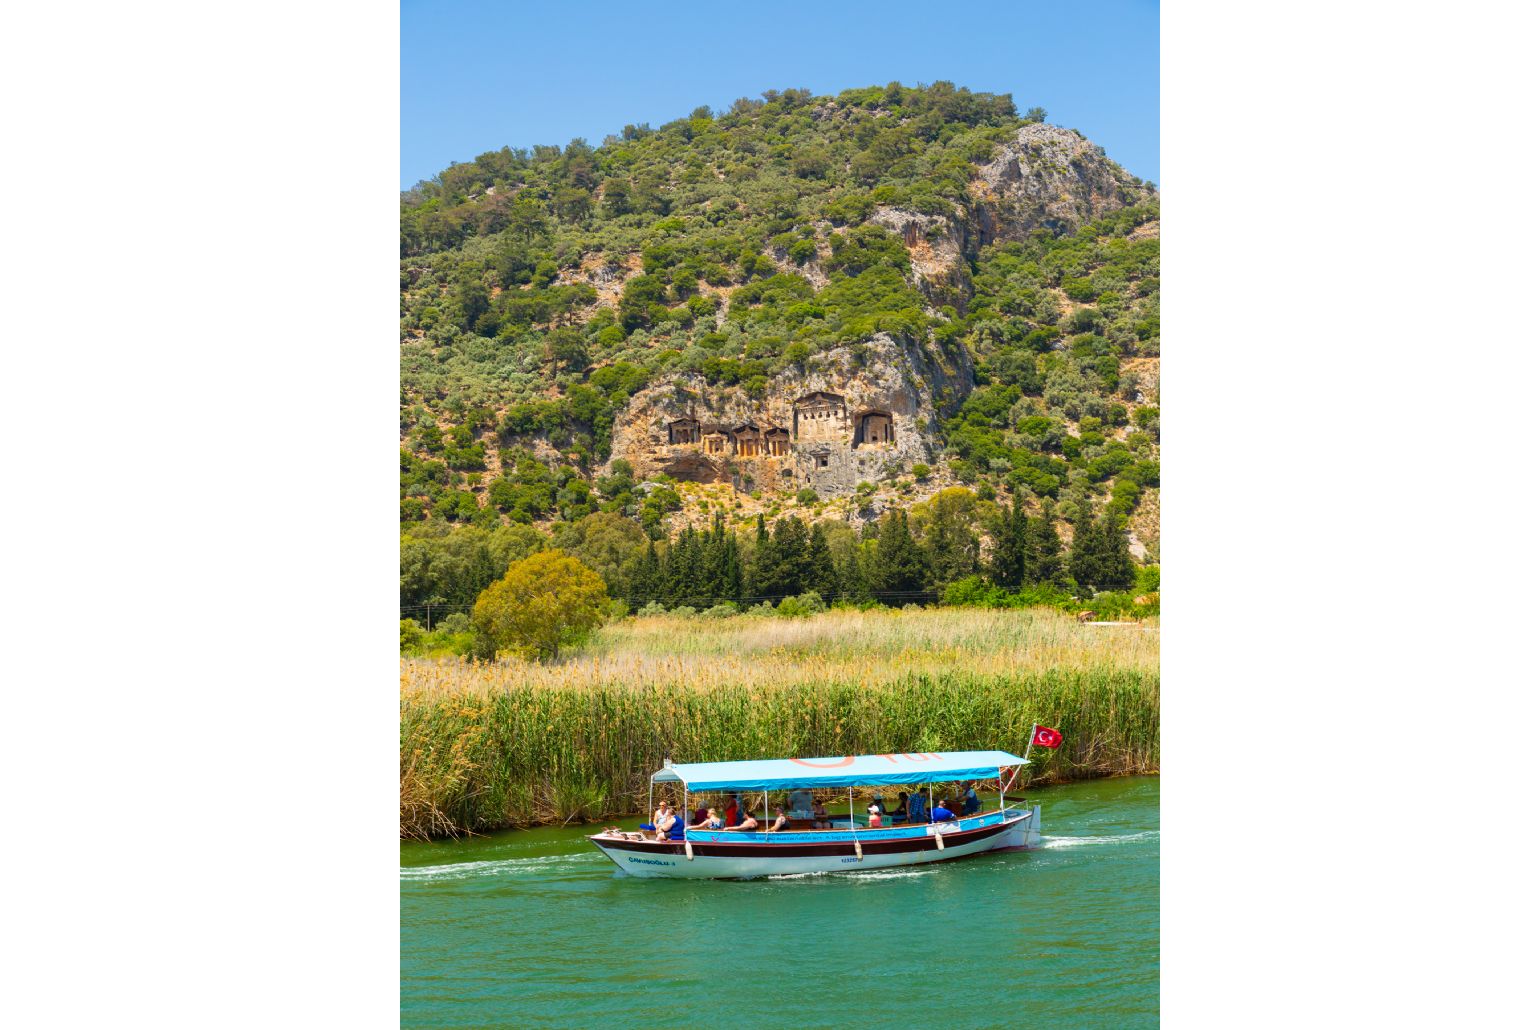 Dalyan river with ancient Lycian rock tombs in background